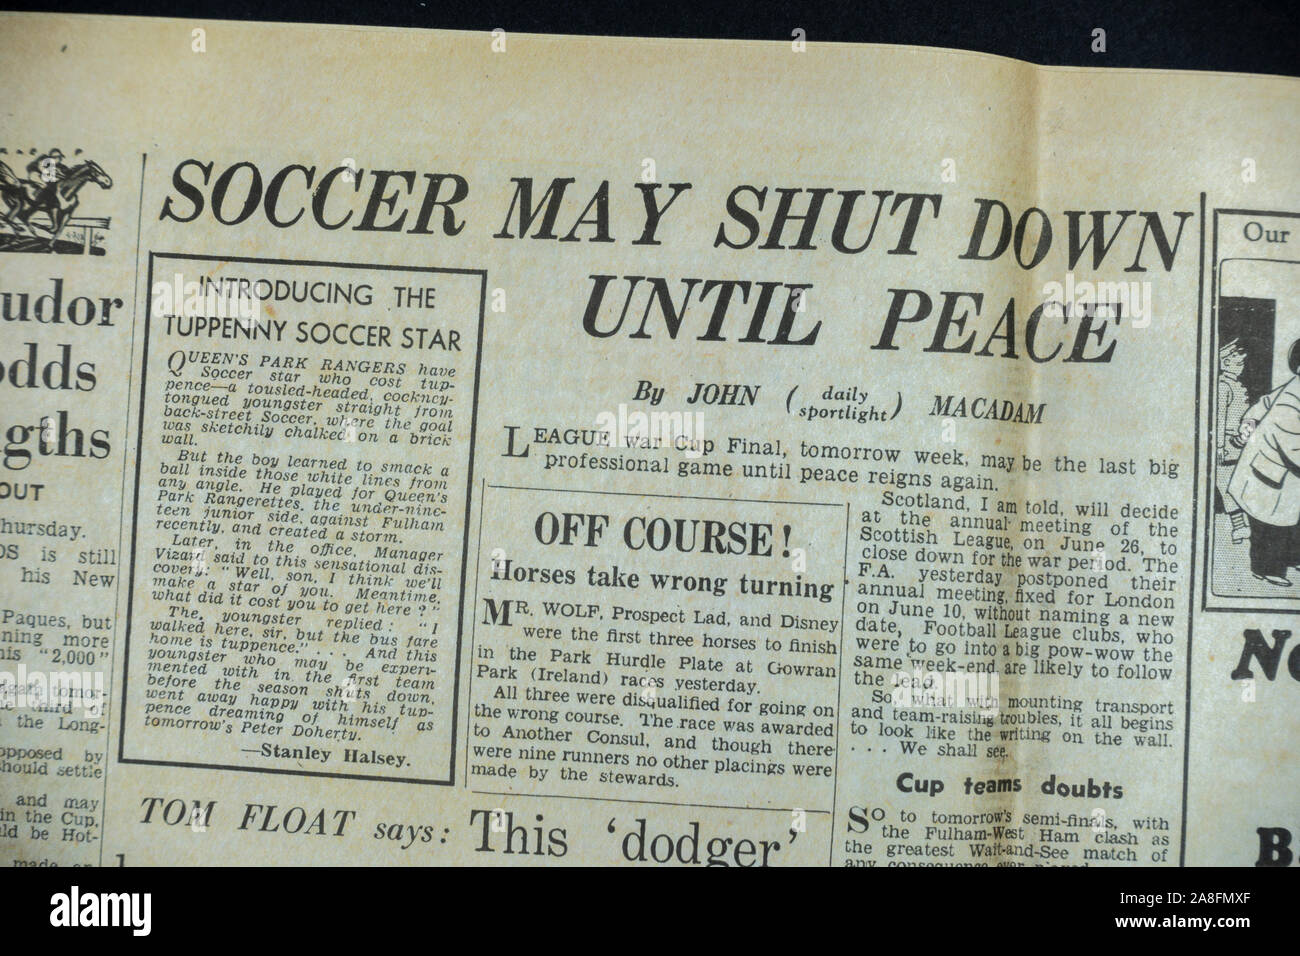 'Soccer may shut down until peace' headline in the Daily Express newspaper (replica) on 31st May 1940 during the Dunkirk evacuation. Stock Photo